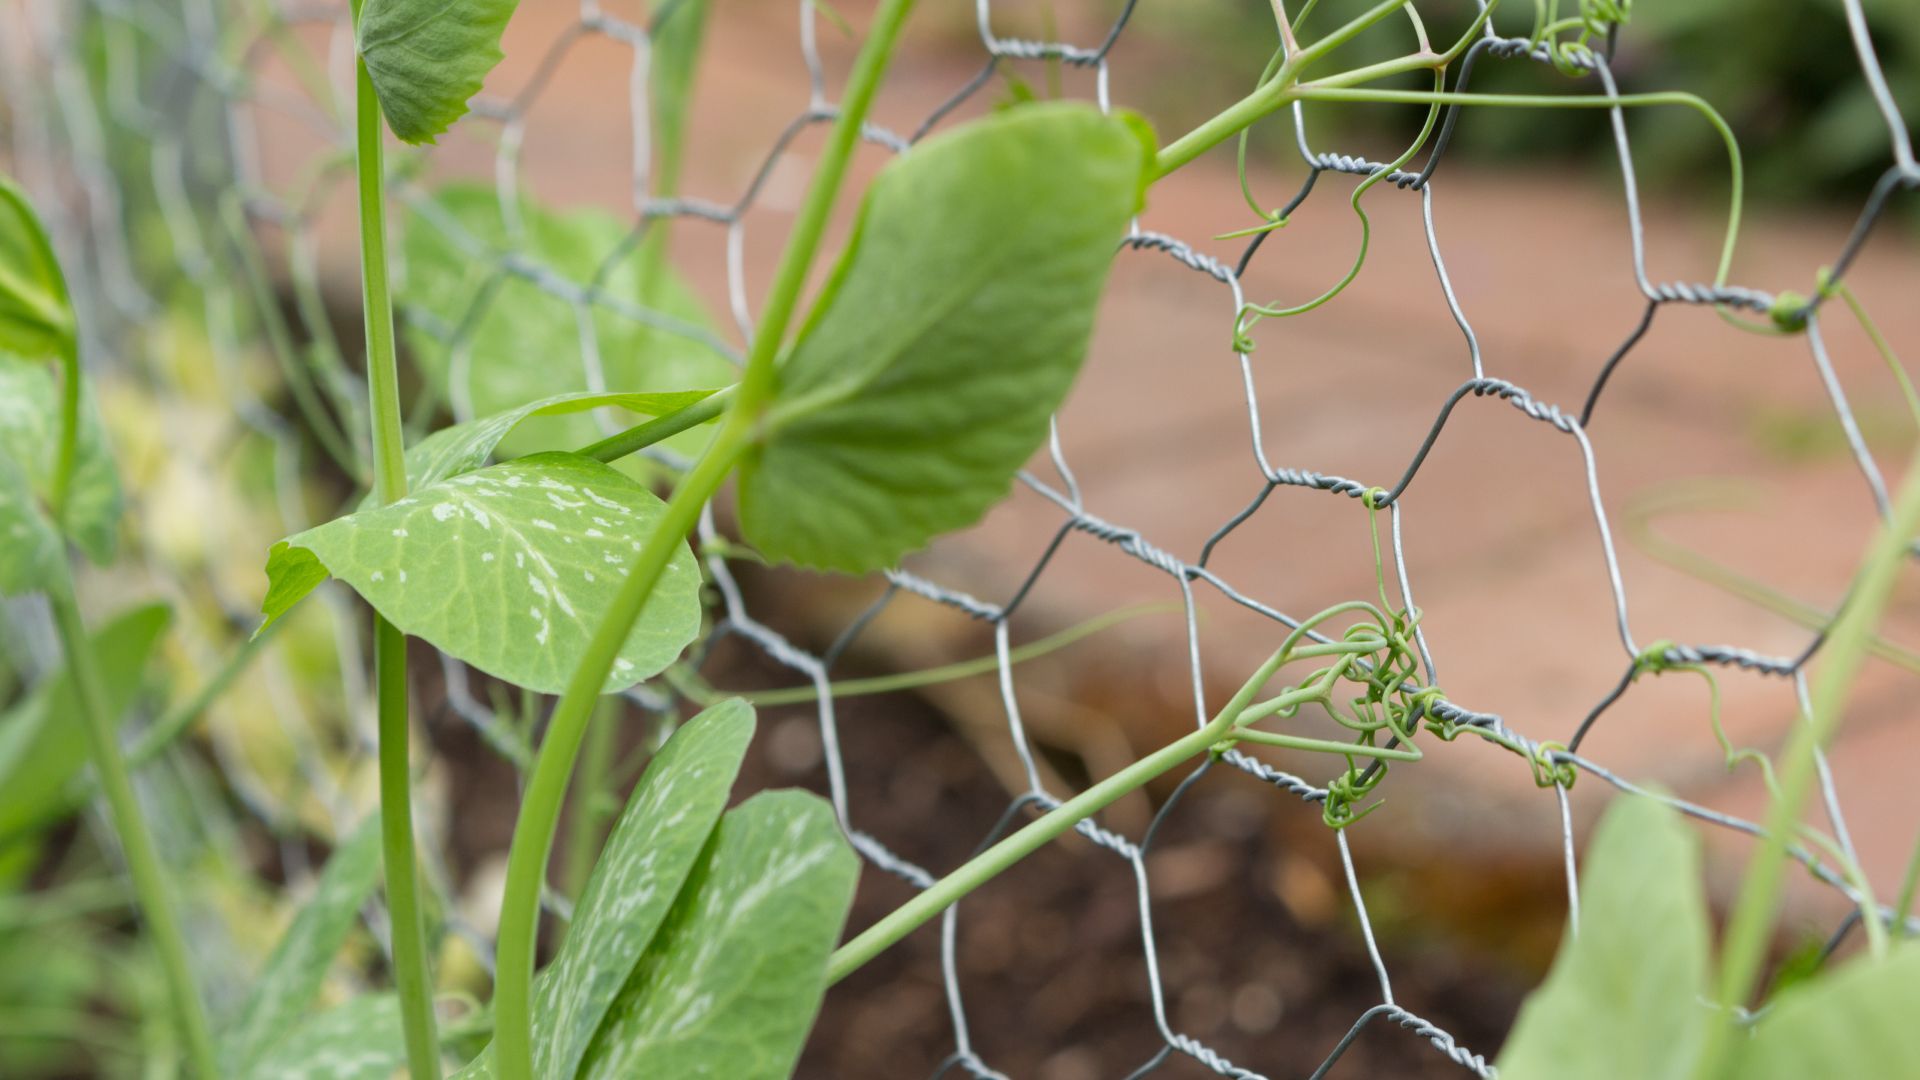 plant wrapping around wire mesh fence in garden.